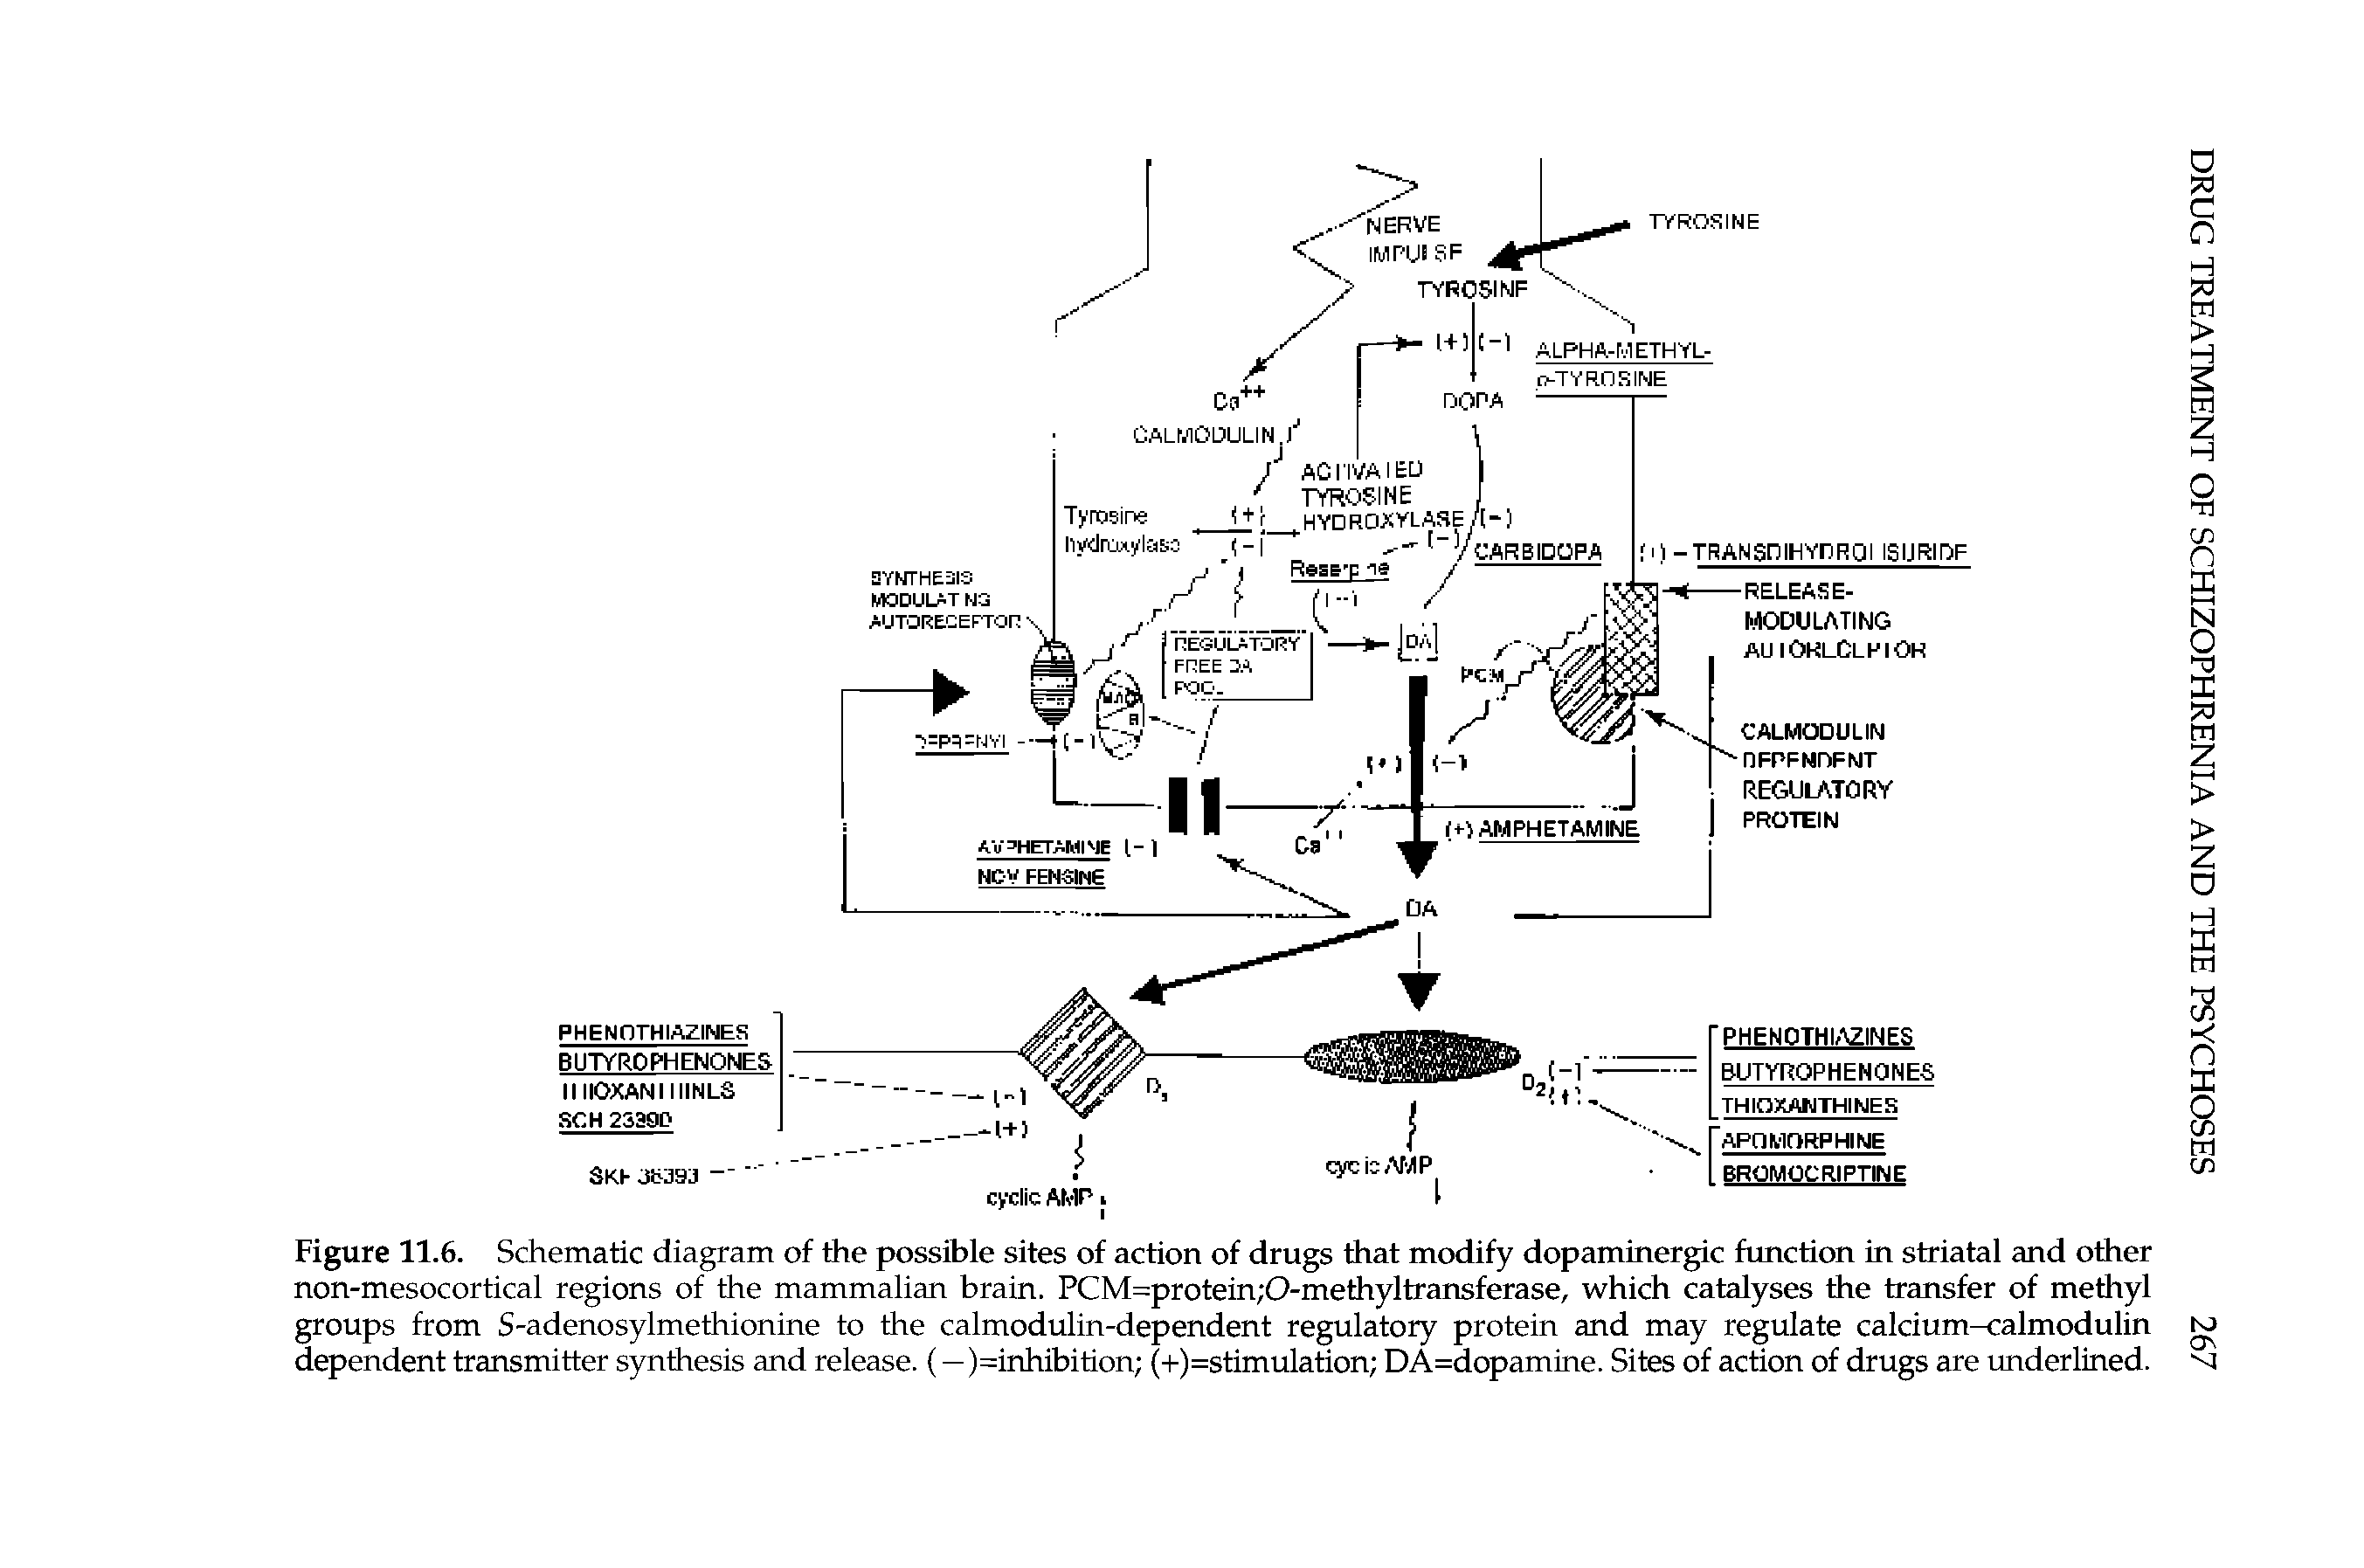 Figure 11.6. Schematic diagram of the possible sites of action of drugs that modify dopaminergic function in striatal and other non-mesocortical regions of the mammalian brain. PCM=protein 0-methyltransferase, which catalyses the transfer of methyl groups from S-adenosylmethionine to the calmodulin-dependent regulatory protein and may regulate calcium-calmodulin dependent transmitter synthesis and release. (—)=inhibition (+)=stimulation DA=dopamine. Sites of action of drugs are underlined.